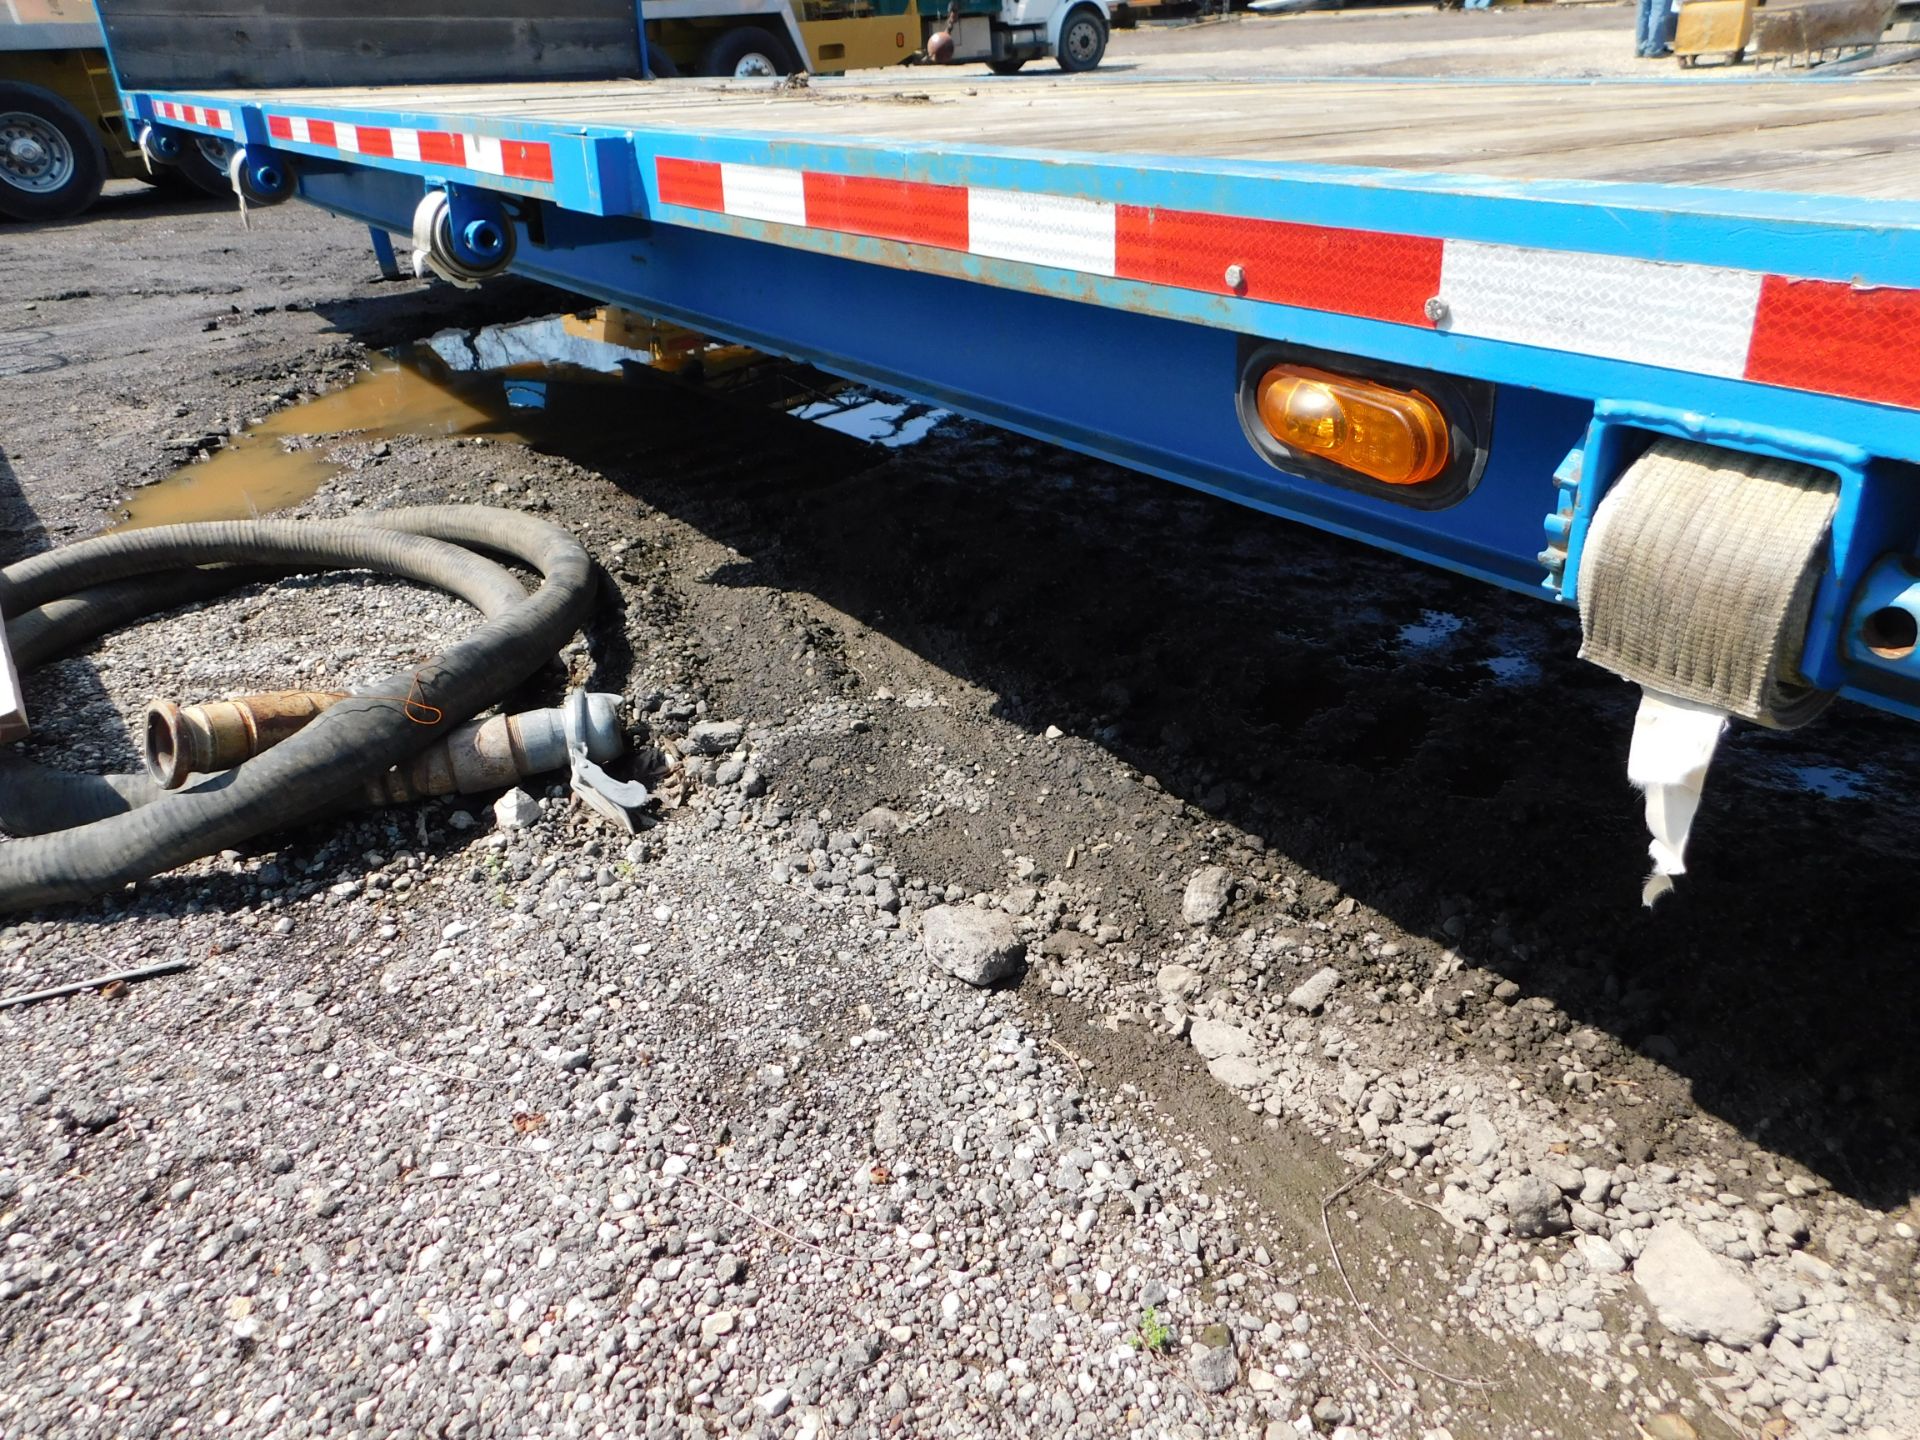 8' x 40' Flat Bed Tongue Pull Trailer, Wood Deck, Quad-Axle, 8-Wheels, Pintle Hitch - Image 8 of 11